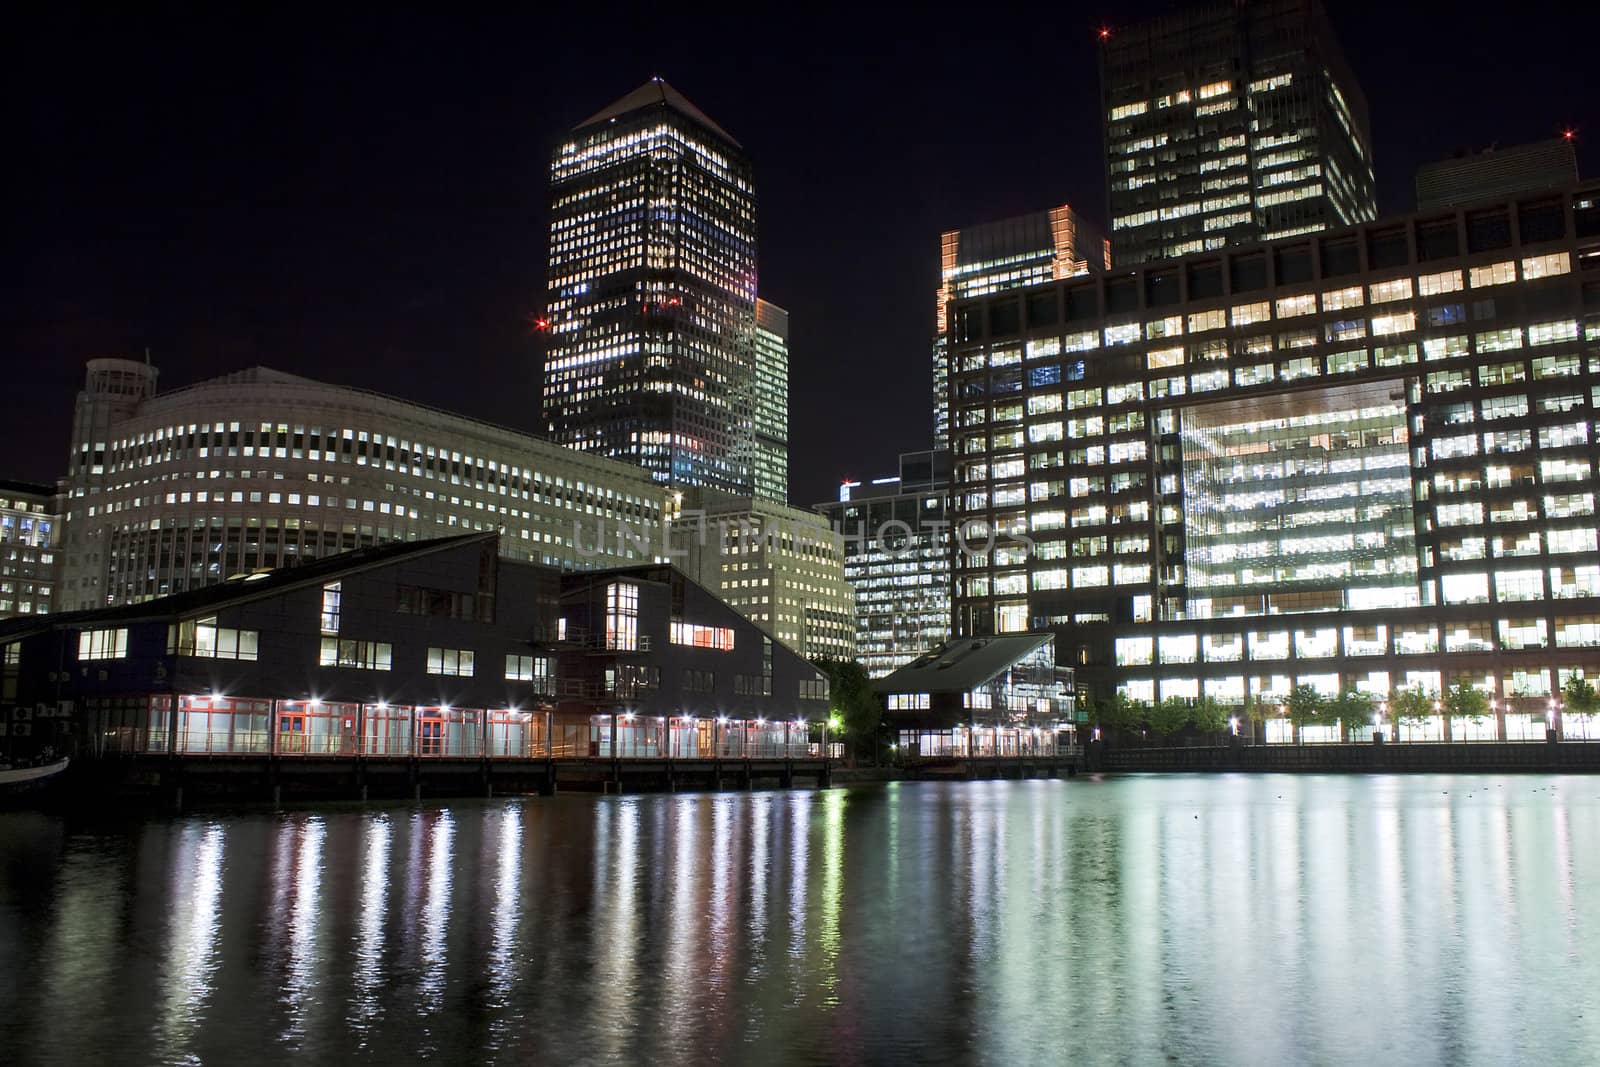 Canary Wharf skyscrapers in London at night by kmiragaya